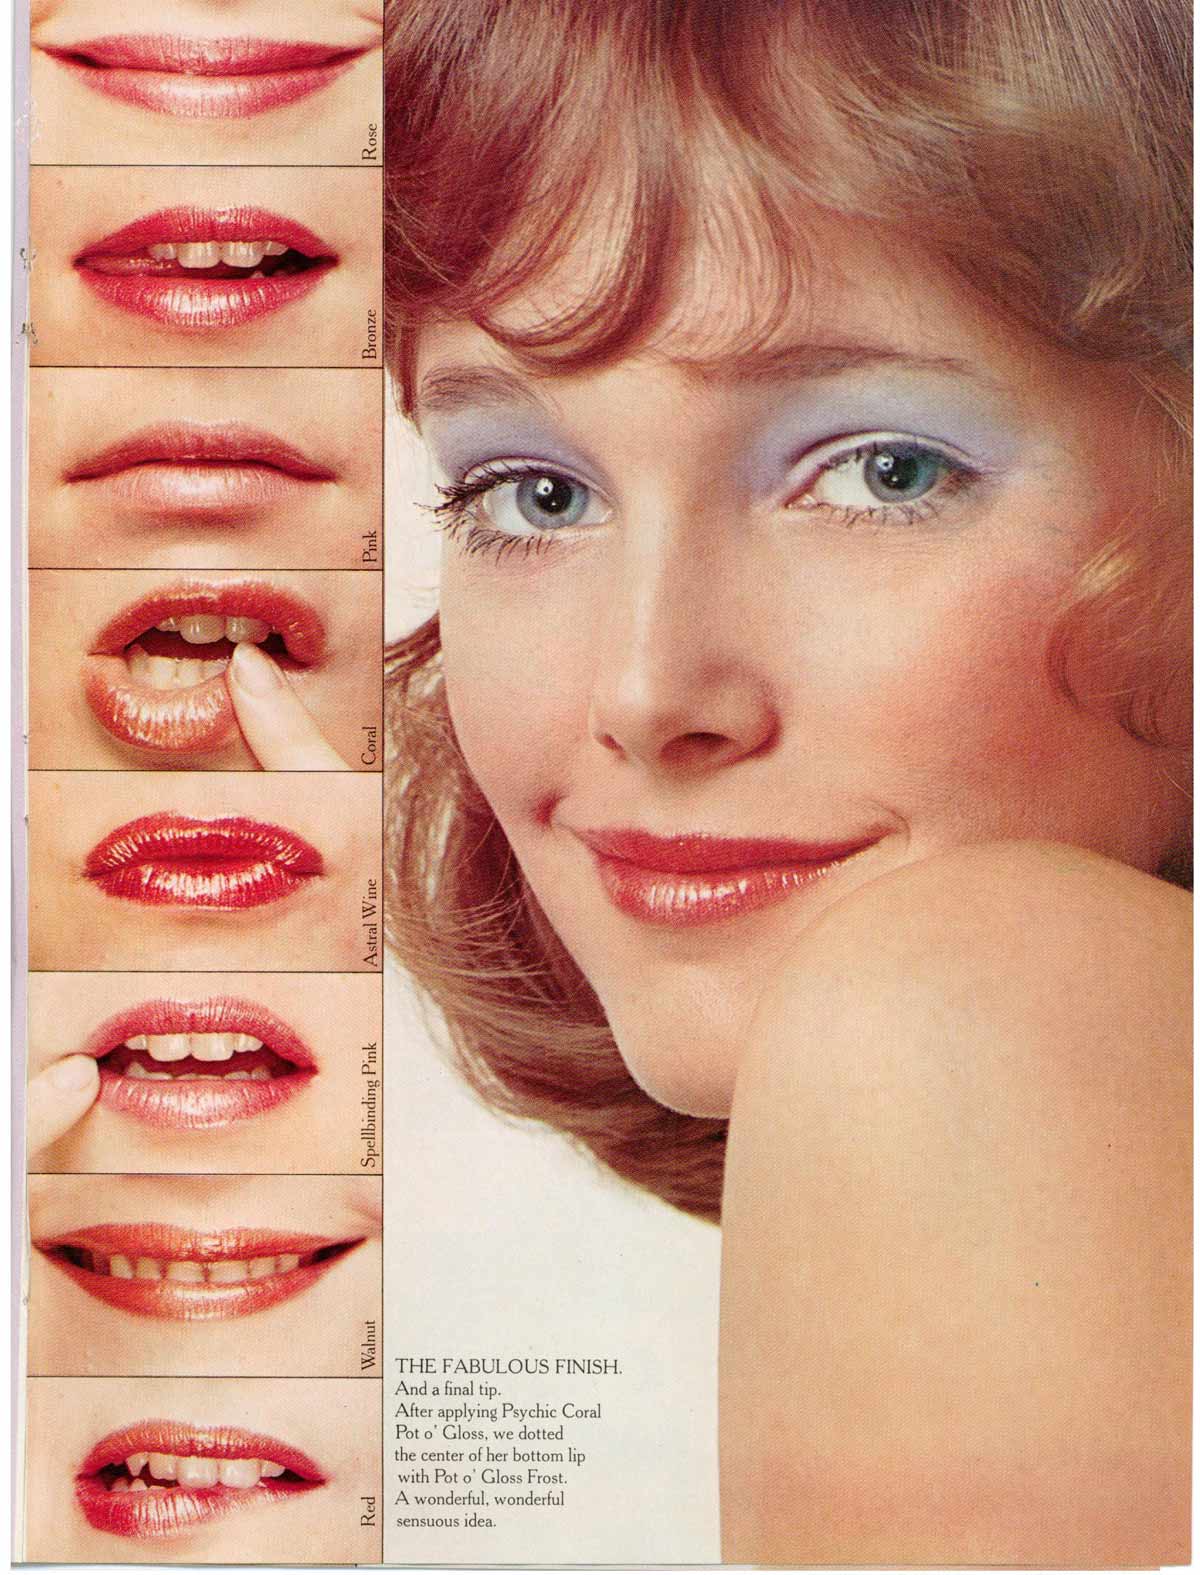 What did makeup look like in the 1970s?